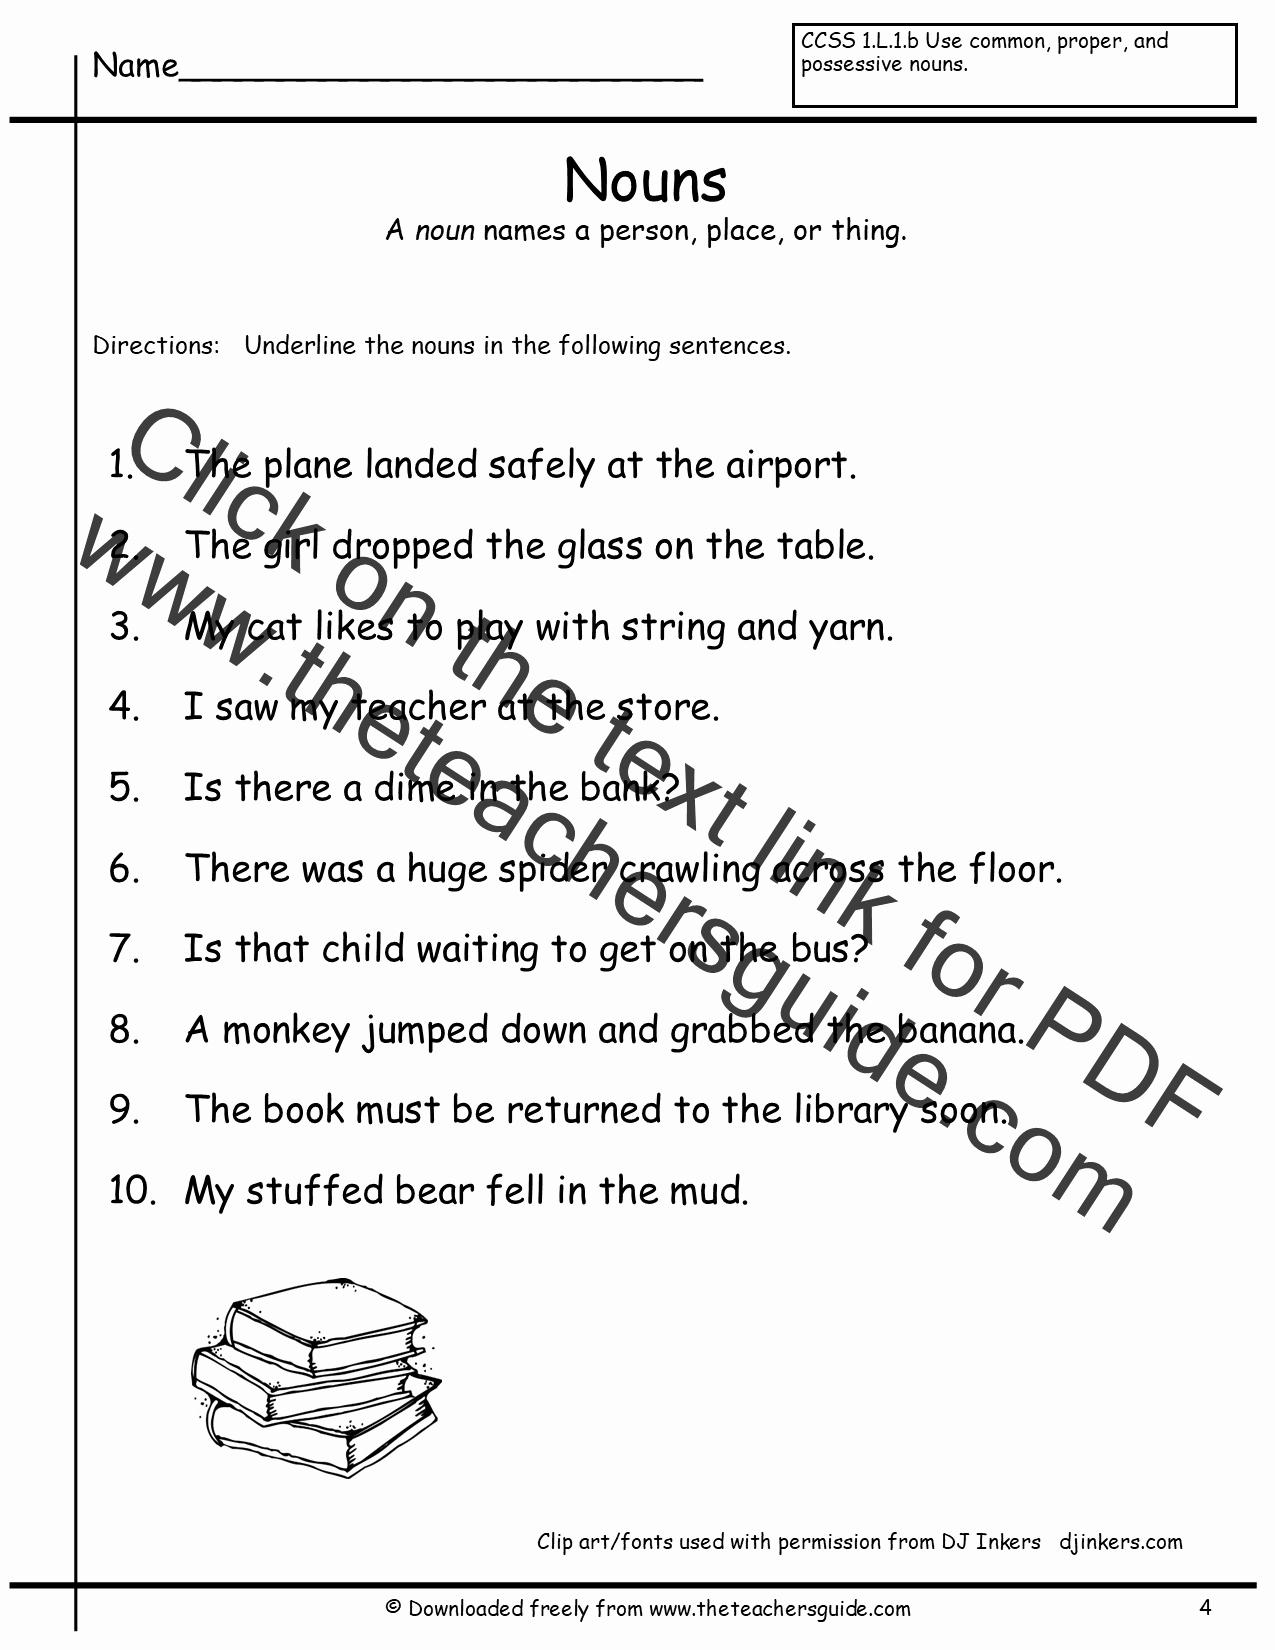 Free Proper Noun Worksheets Luxury Nouns Worksheets From the Teacher S Guide